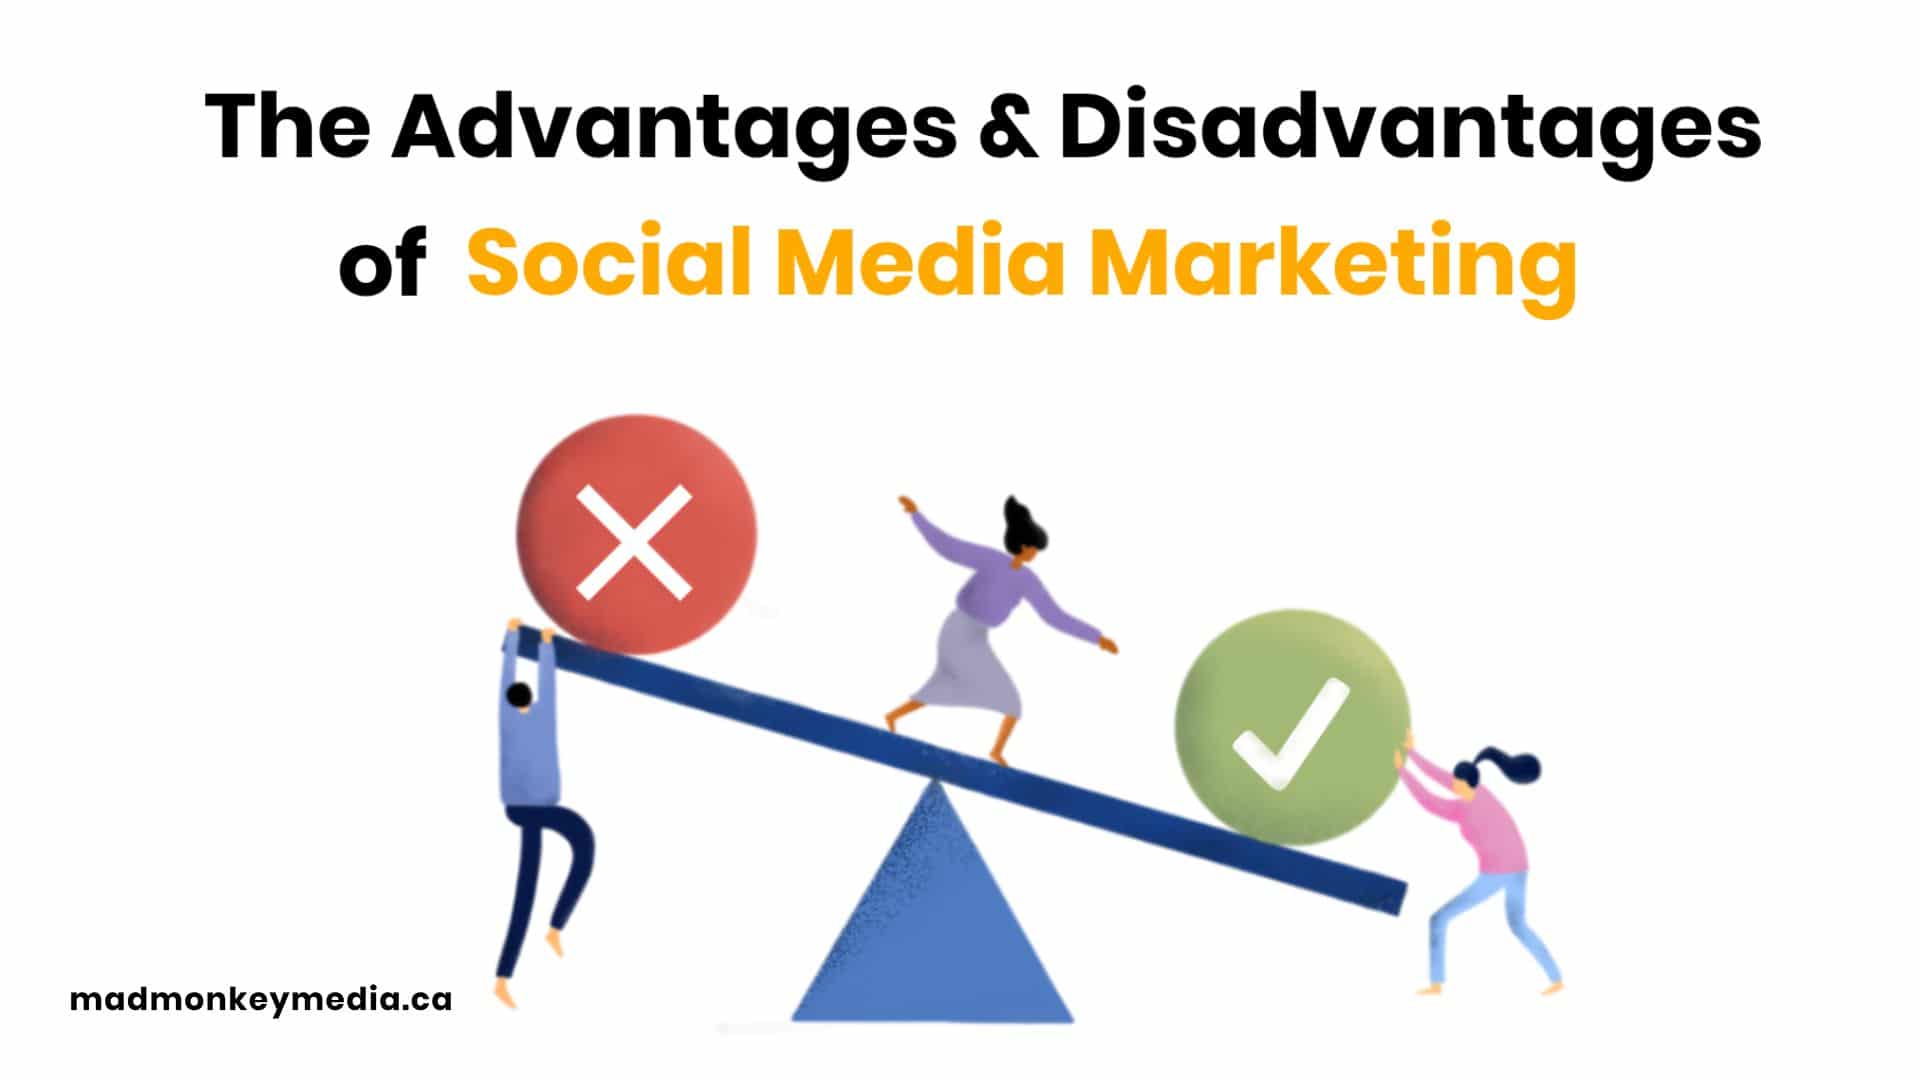 what are the advantages and disadvantages of social media marketing